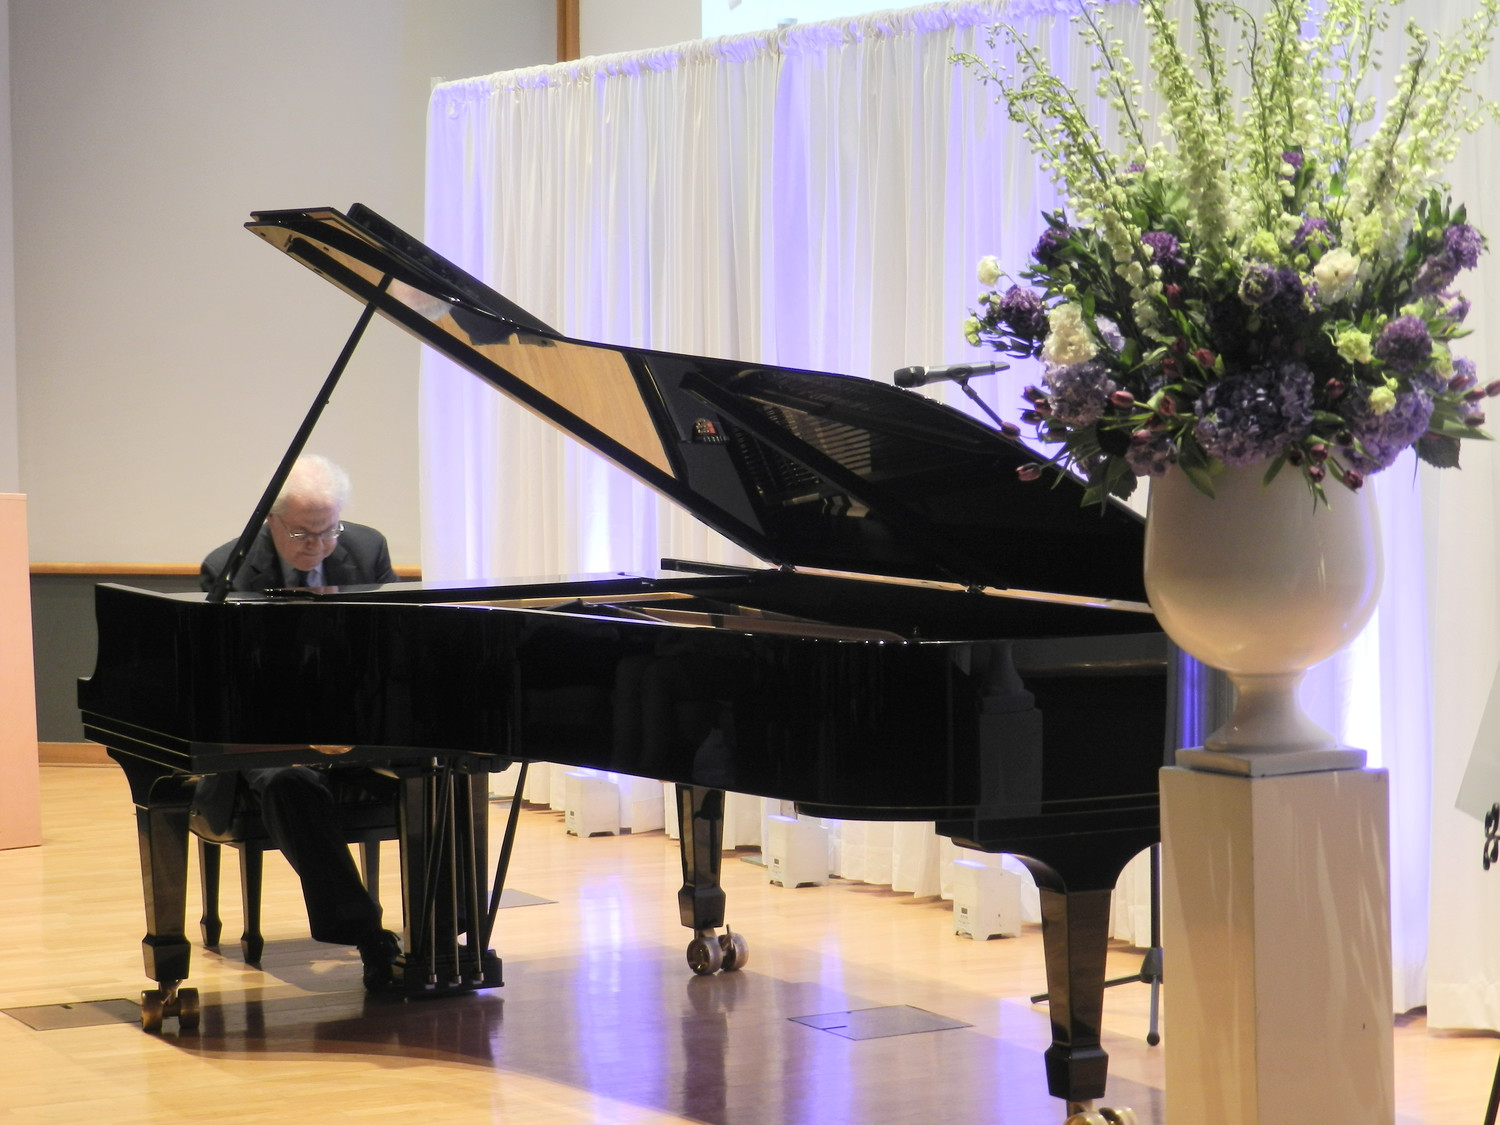 Classical pianist Emanuel Ax performed a few numbers for party guests as a gift to Dr. Watson